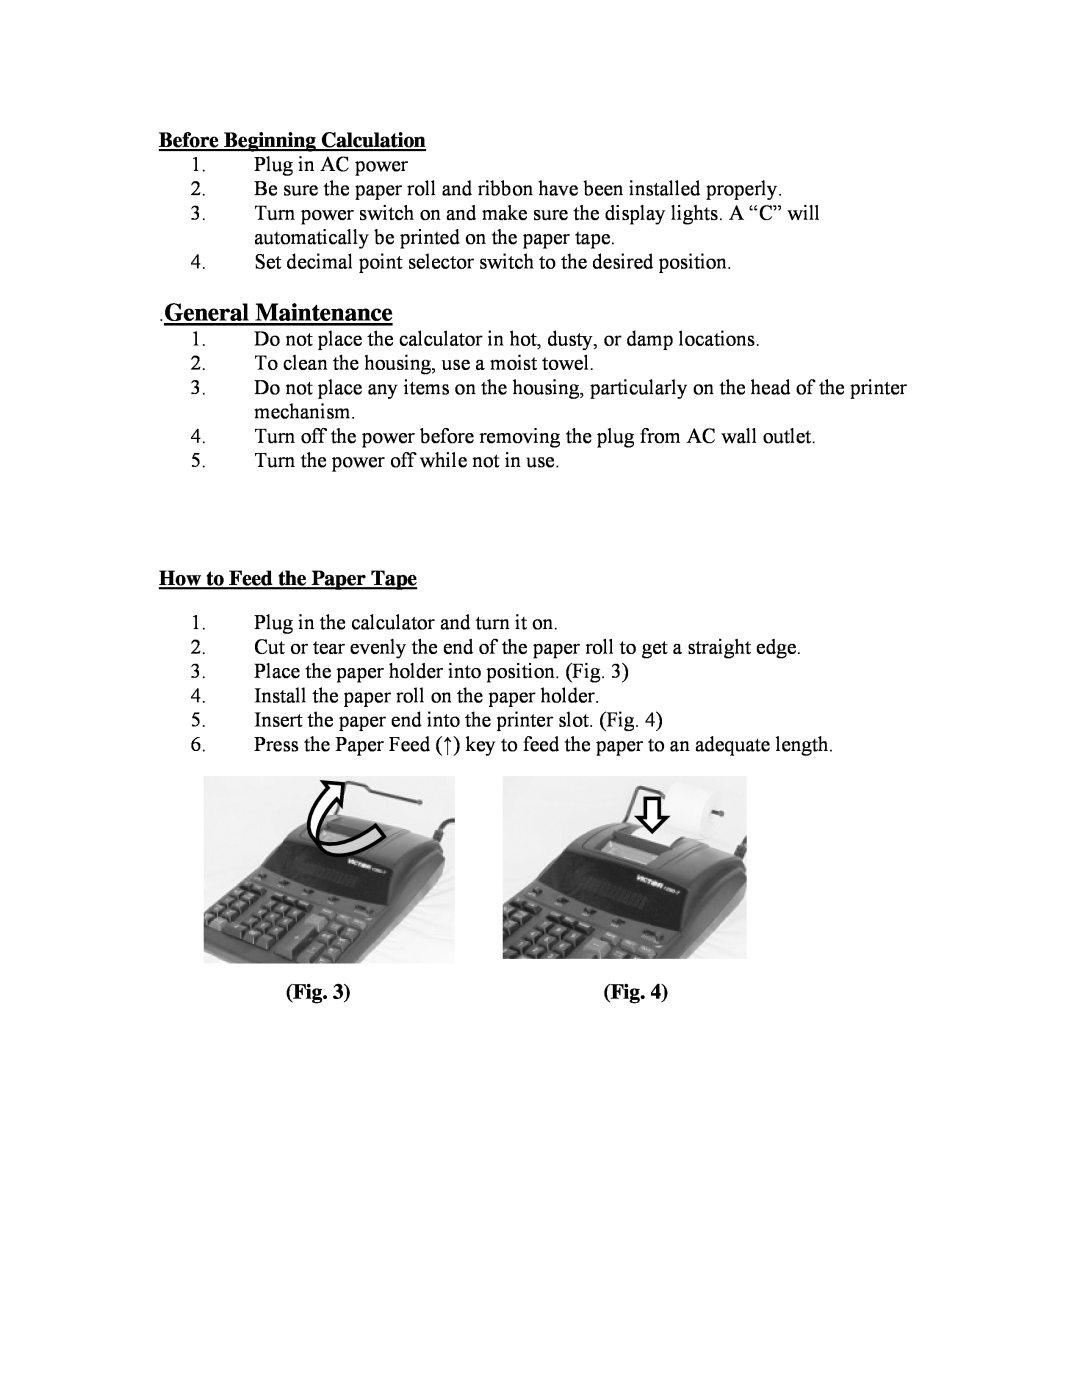 Victor 1280-7 specifications General Maintenance, Before Beginning Calculation, How to Feed the Paper Tape 